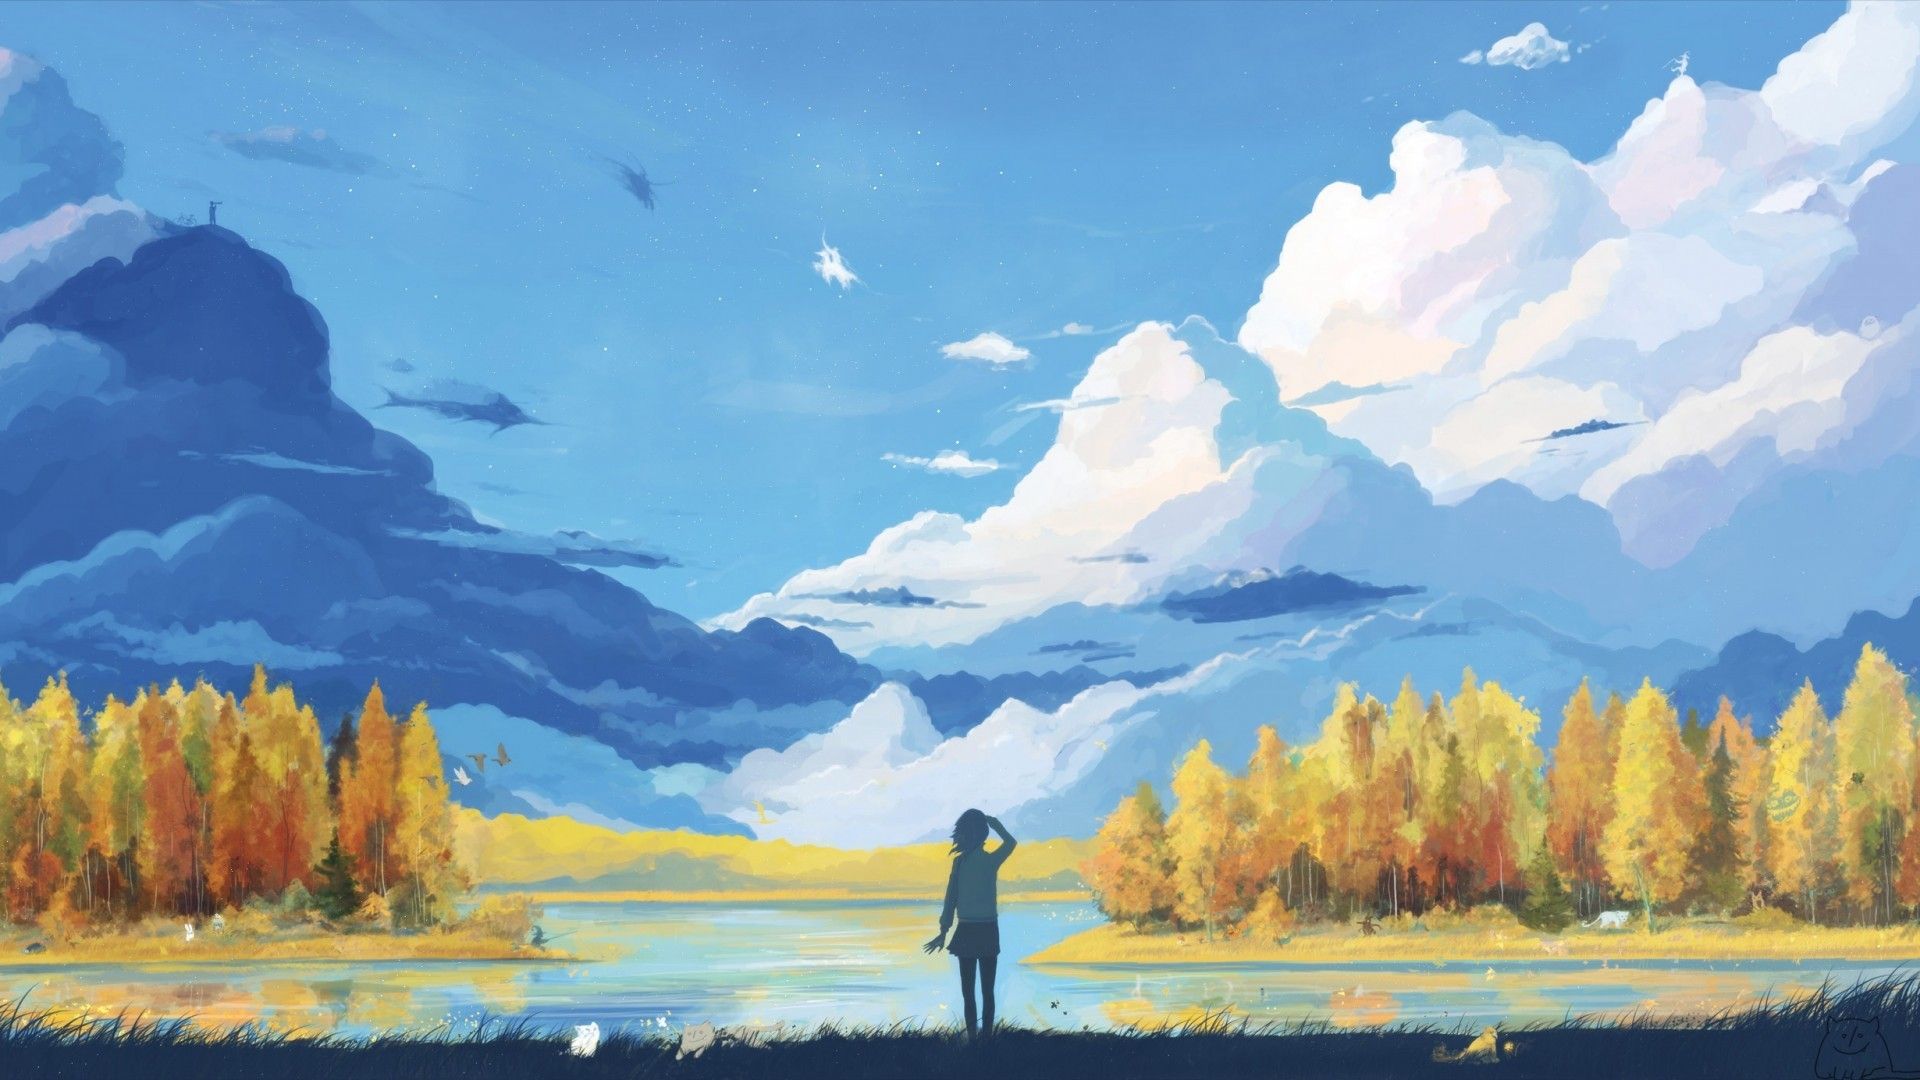 Download 1920x1080 Anime Landscape, Girl, Mountain, Relaxing, Trees, Clouds, Scenic Wallpaper for Widescreen